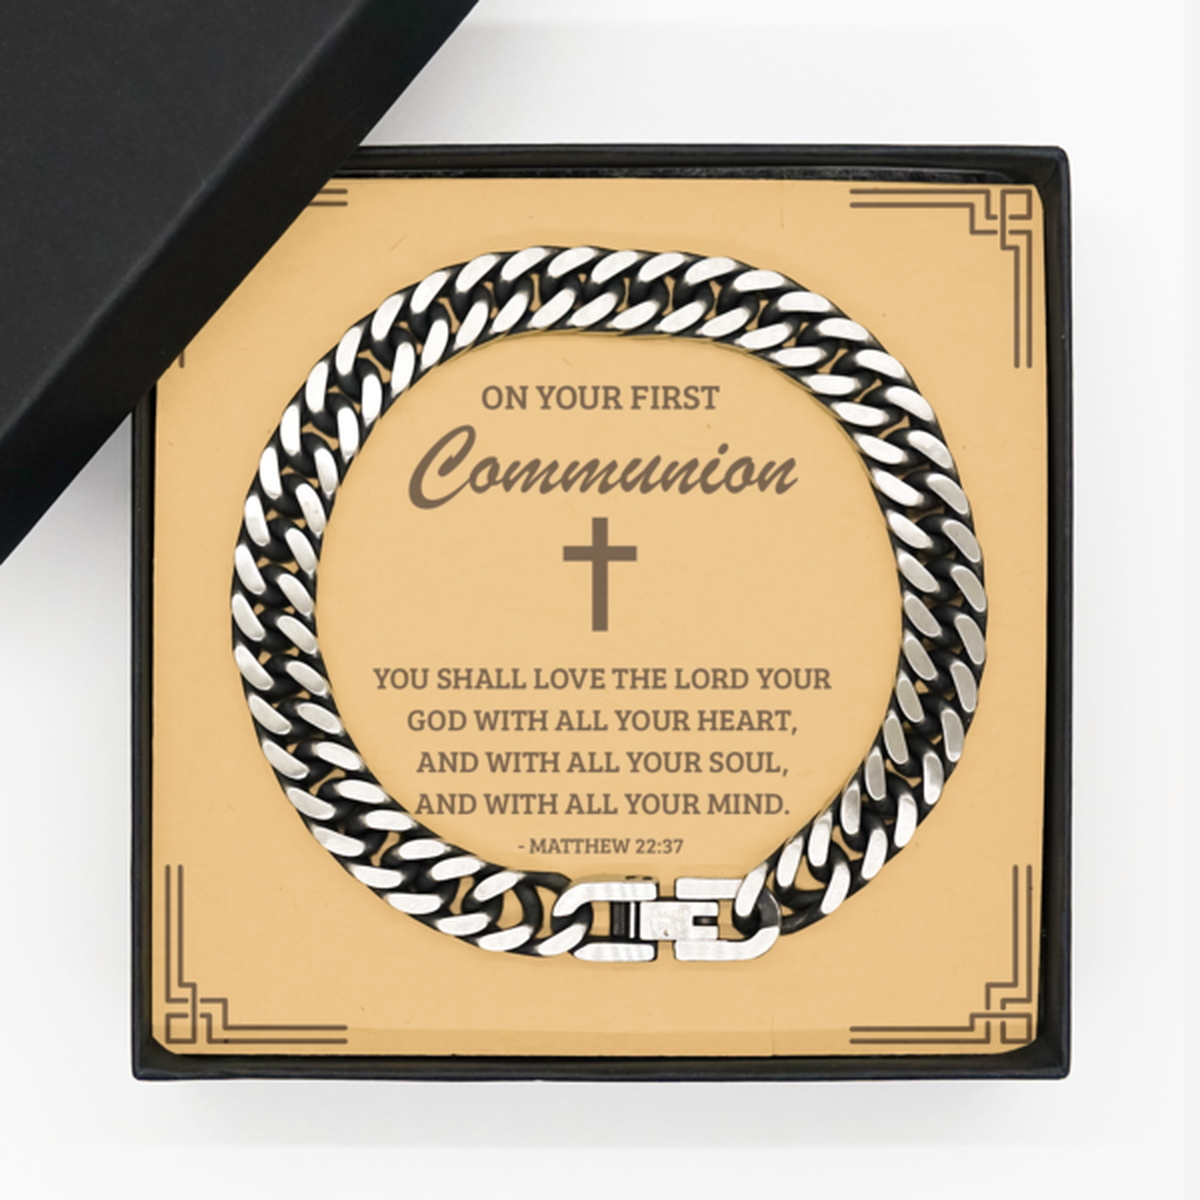 First Communion Gifts for Teenage Boys, You shall love the Lord your God, Cuban Link Chain Bracelet with Bible Verse Message Card, Religious Catholic Bracelet for Son, Grandson, Dad, Godfather